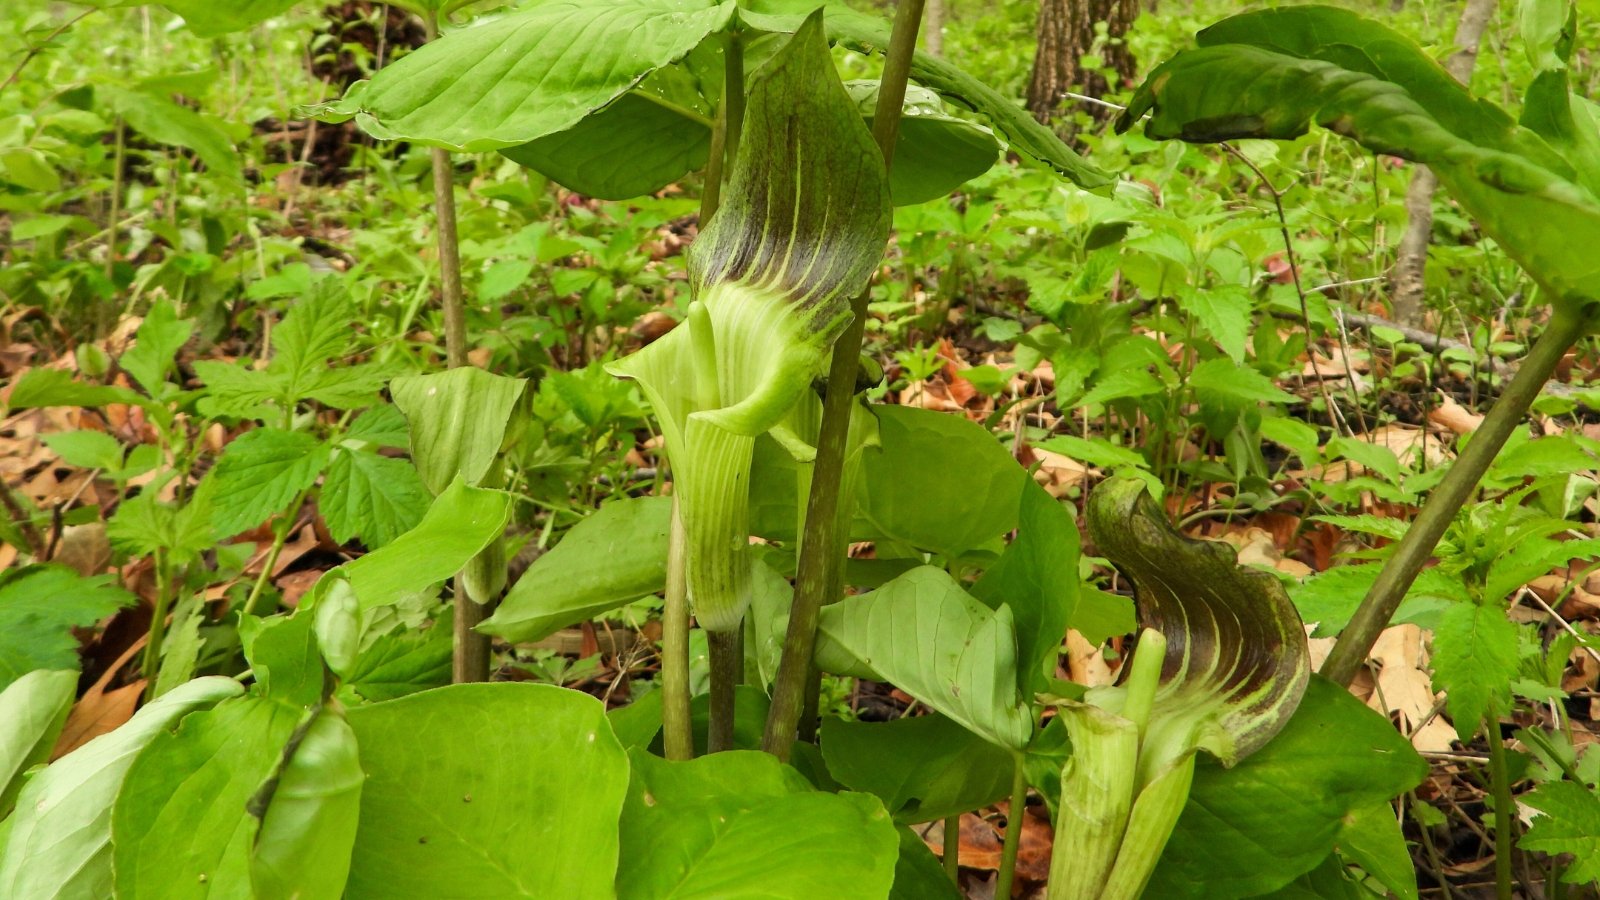 The jack-in-the-pulpit presents an intriguing floral structure with a hooded spathe sheltering a spadix, set amidst broad, green, three-part leaves.